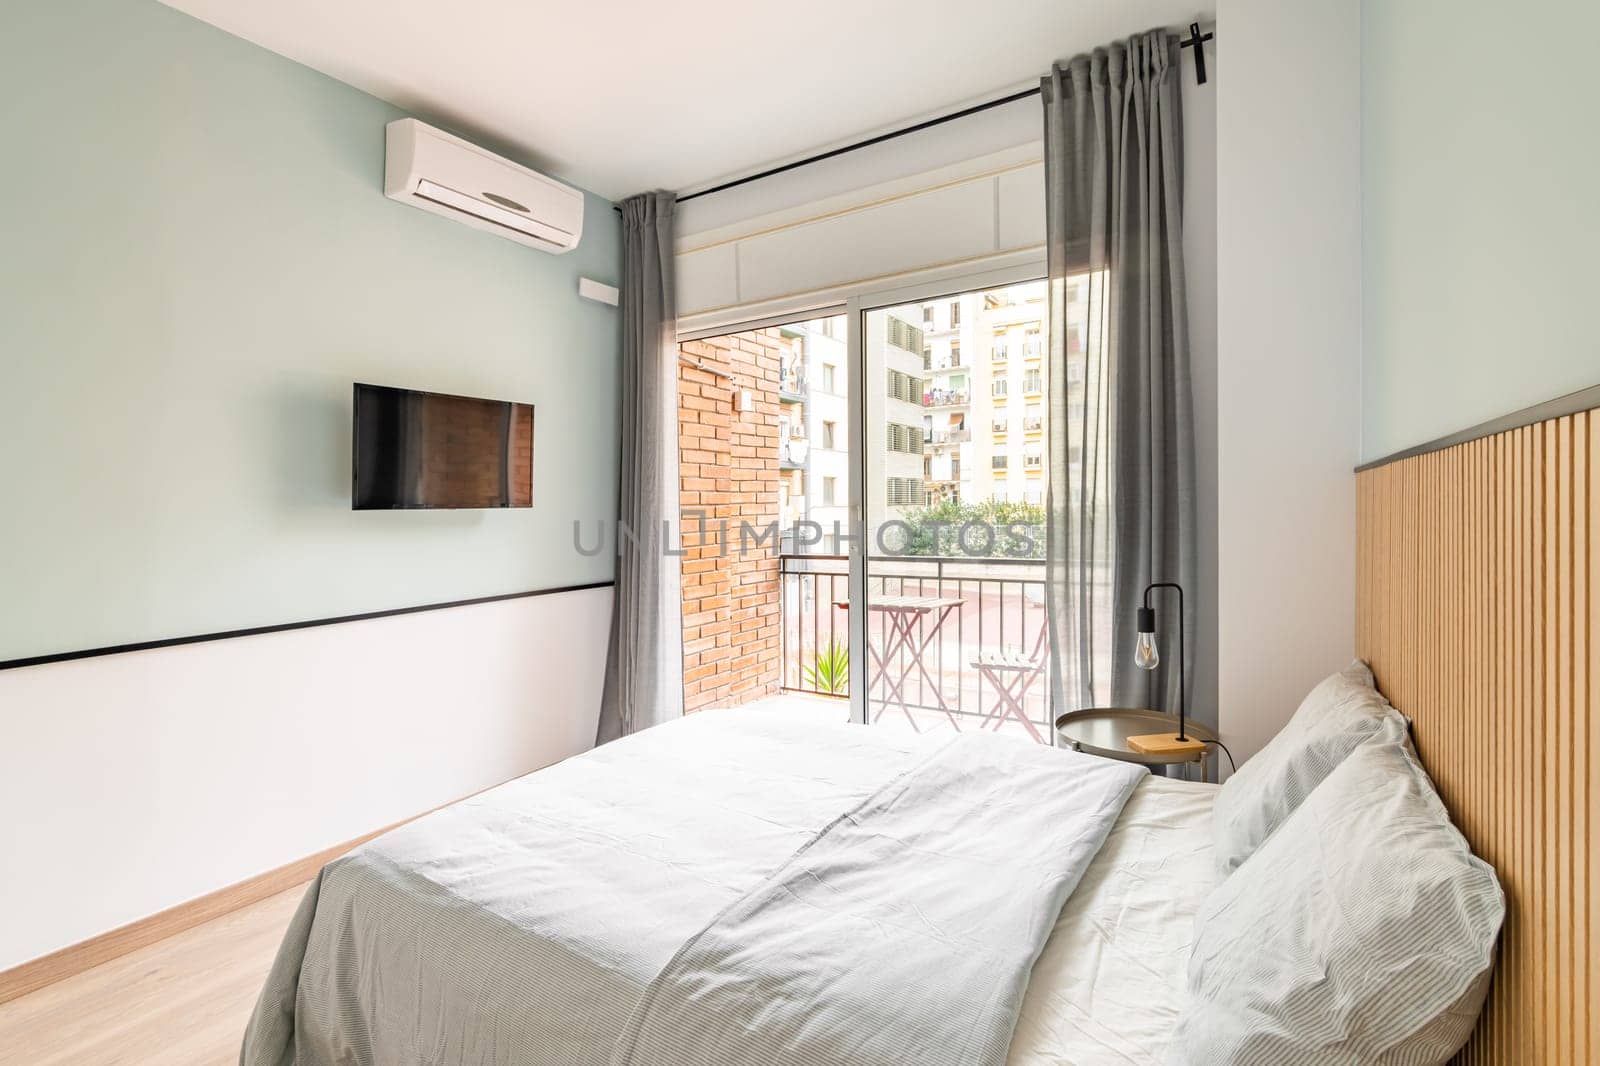 Small but pleasant bedroom with a double bed with white linens, TV and an open terrace overlooking the courtyard of a residential complex or tourist hotel on a sunny summer day.